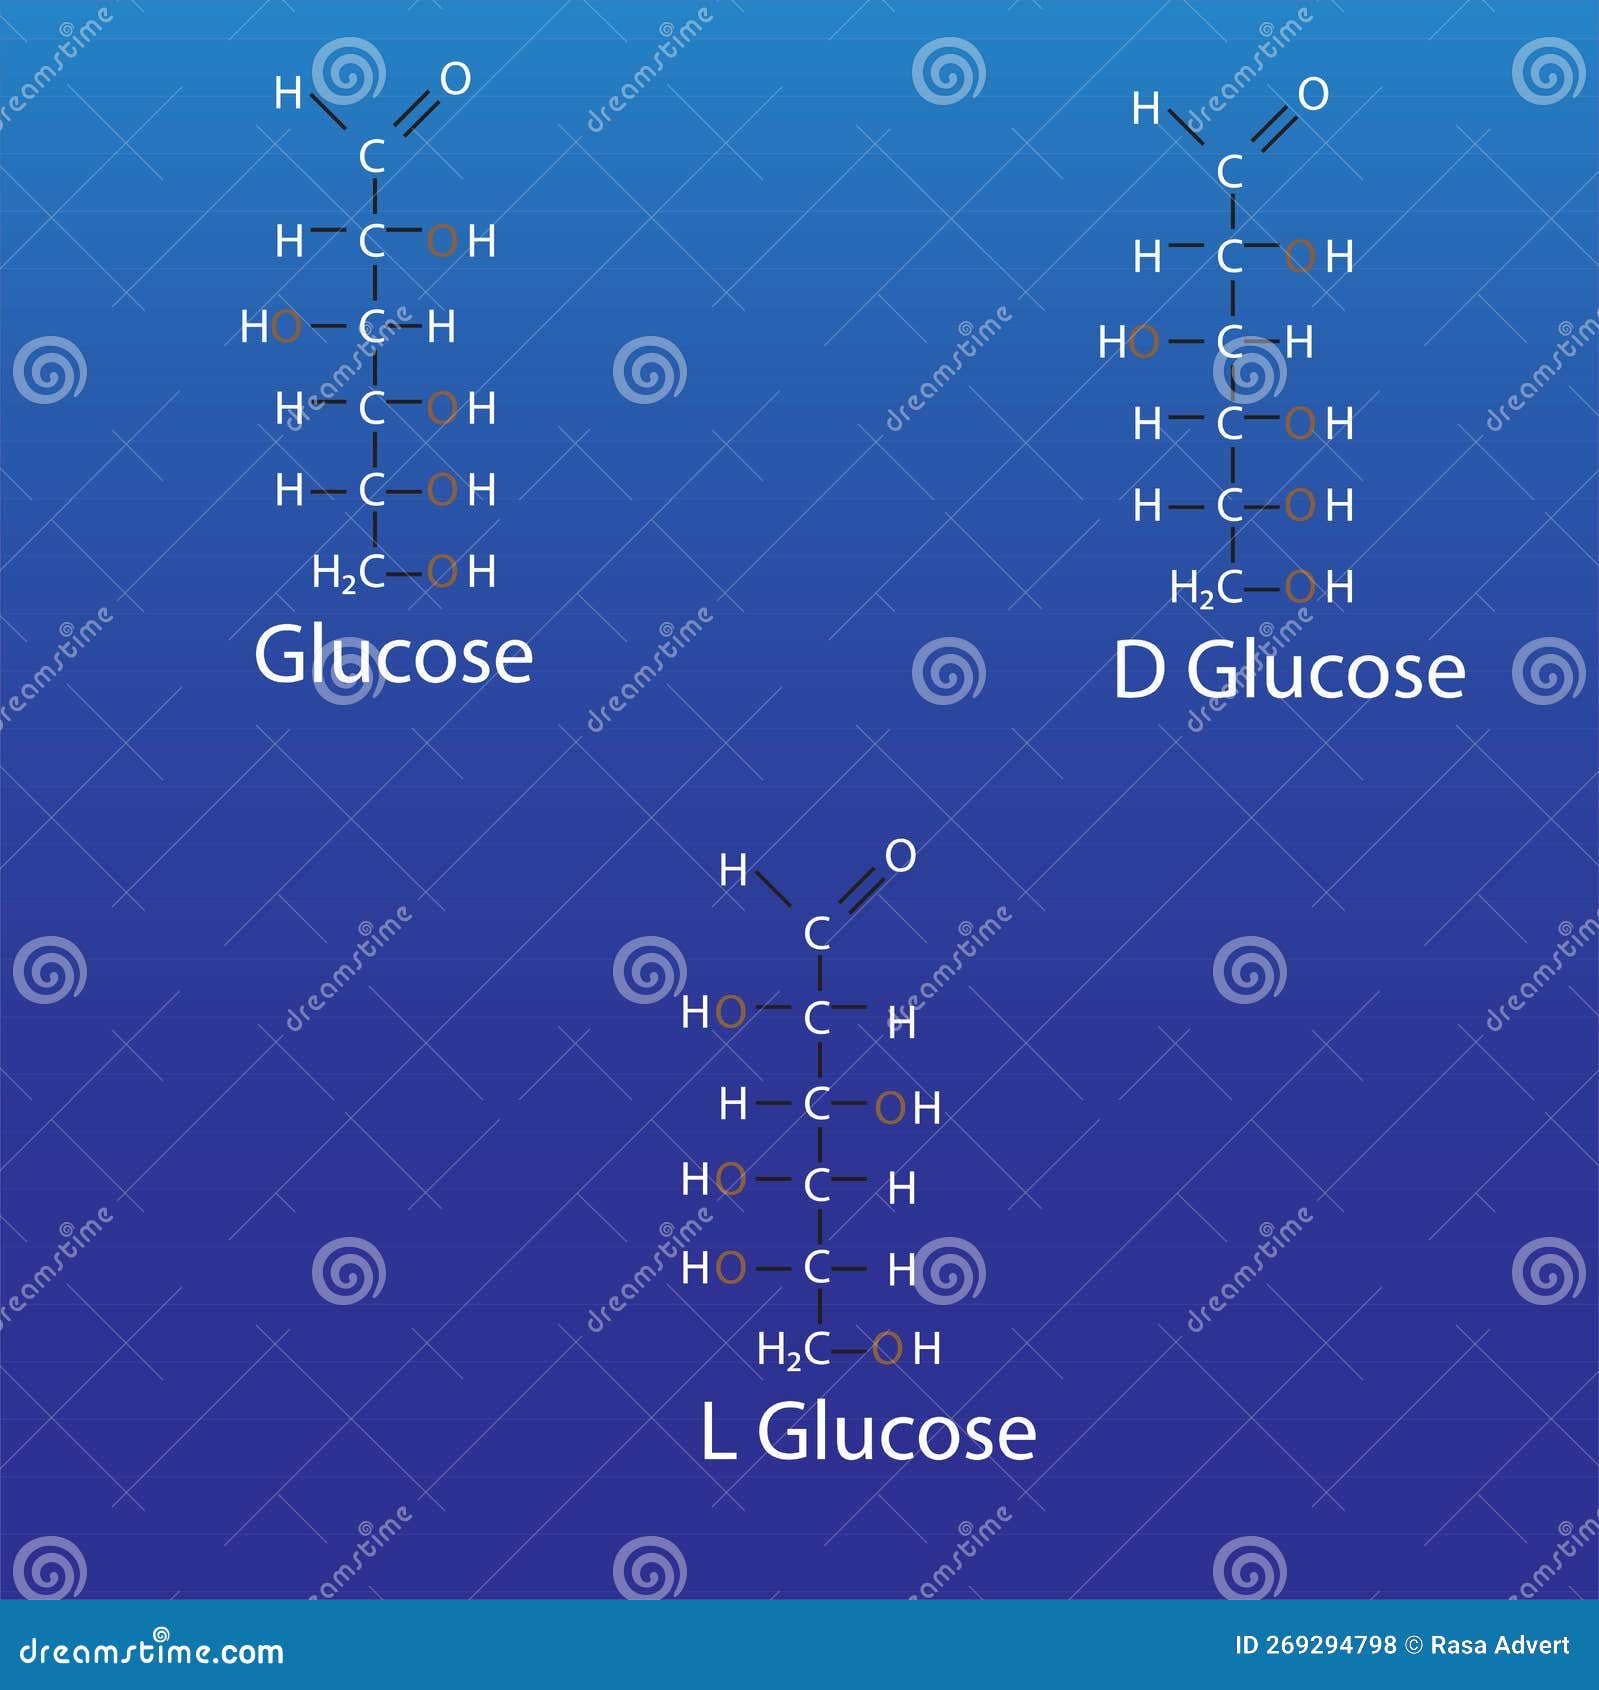 structure of l glucose glucose linear form